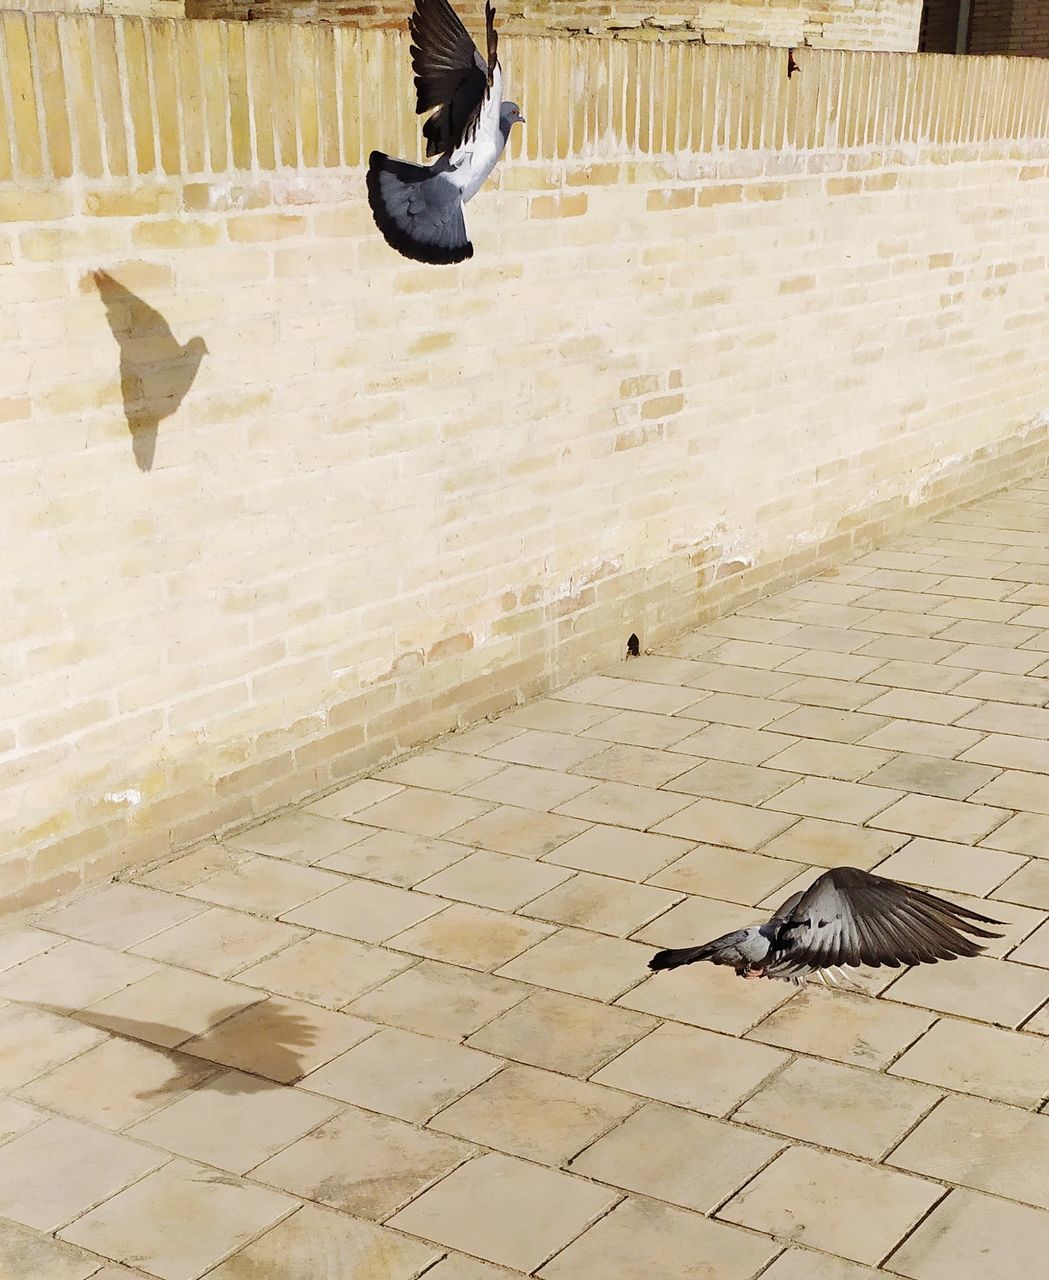 floor, wall, flooring, wood, bird, flying, mid-air, day, animal themes, animal, architecture, one person, outdoors, nature, wing, animal wildlife, wildlife, footpath, pigeon, sunlight, men